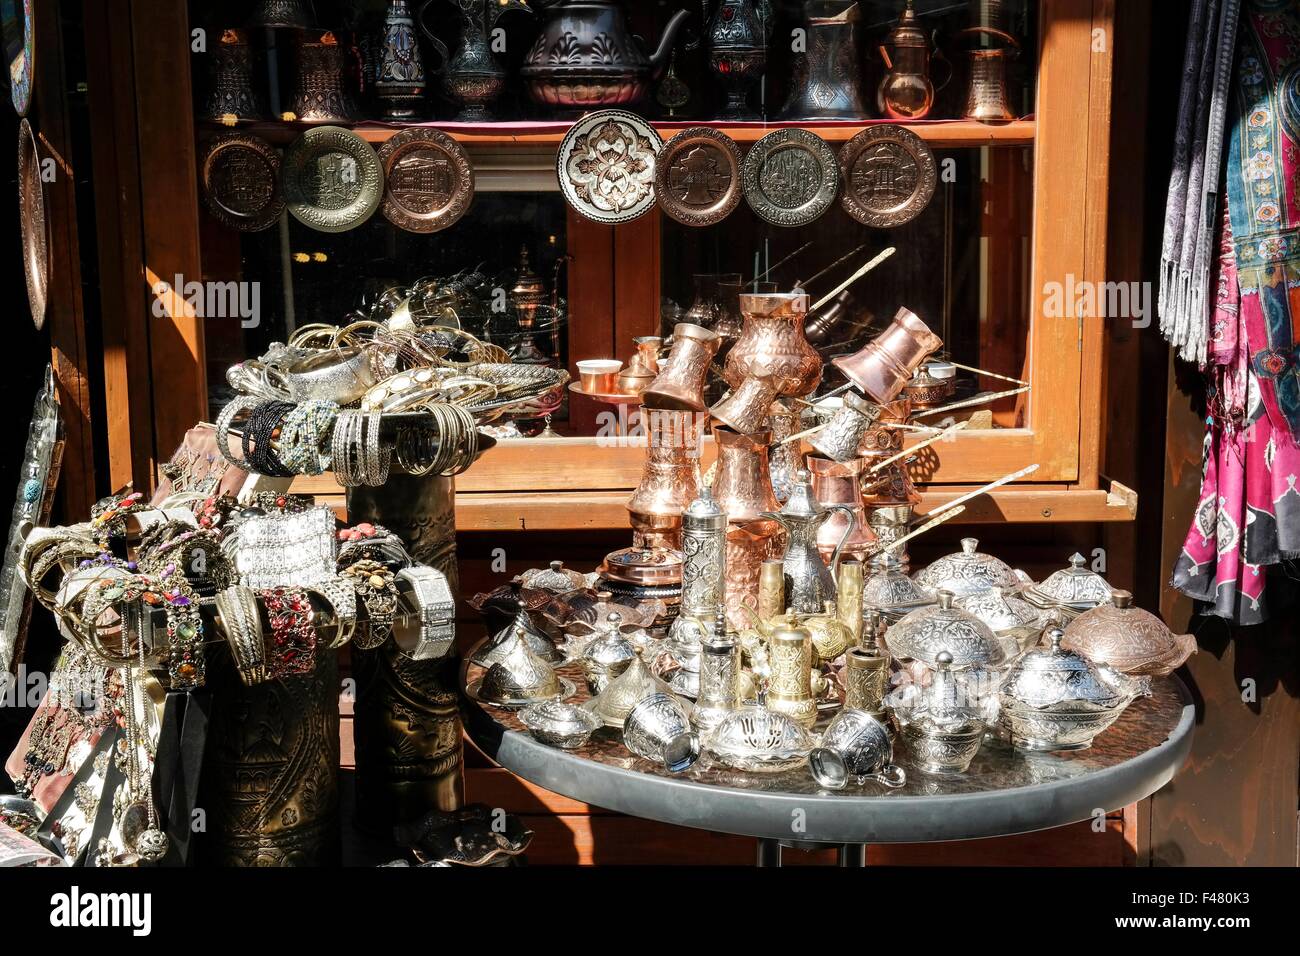 Craftwork, especially sets for bosnian coffee, made and sold in Sarajevo's old town 'Bascarsija'. Stock Photo